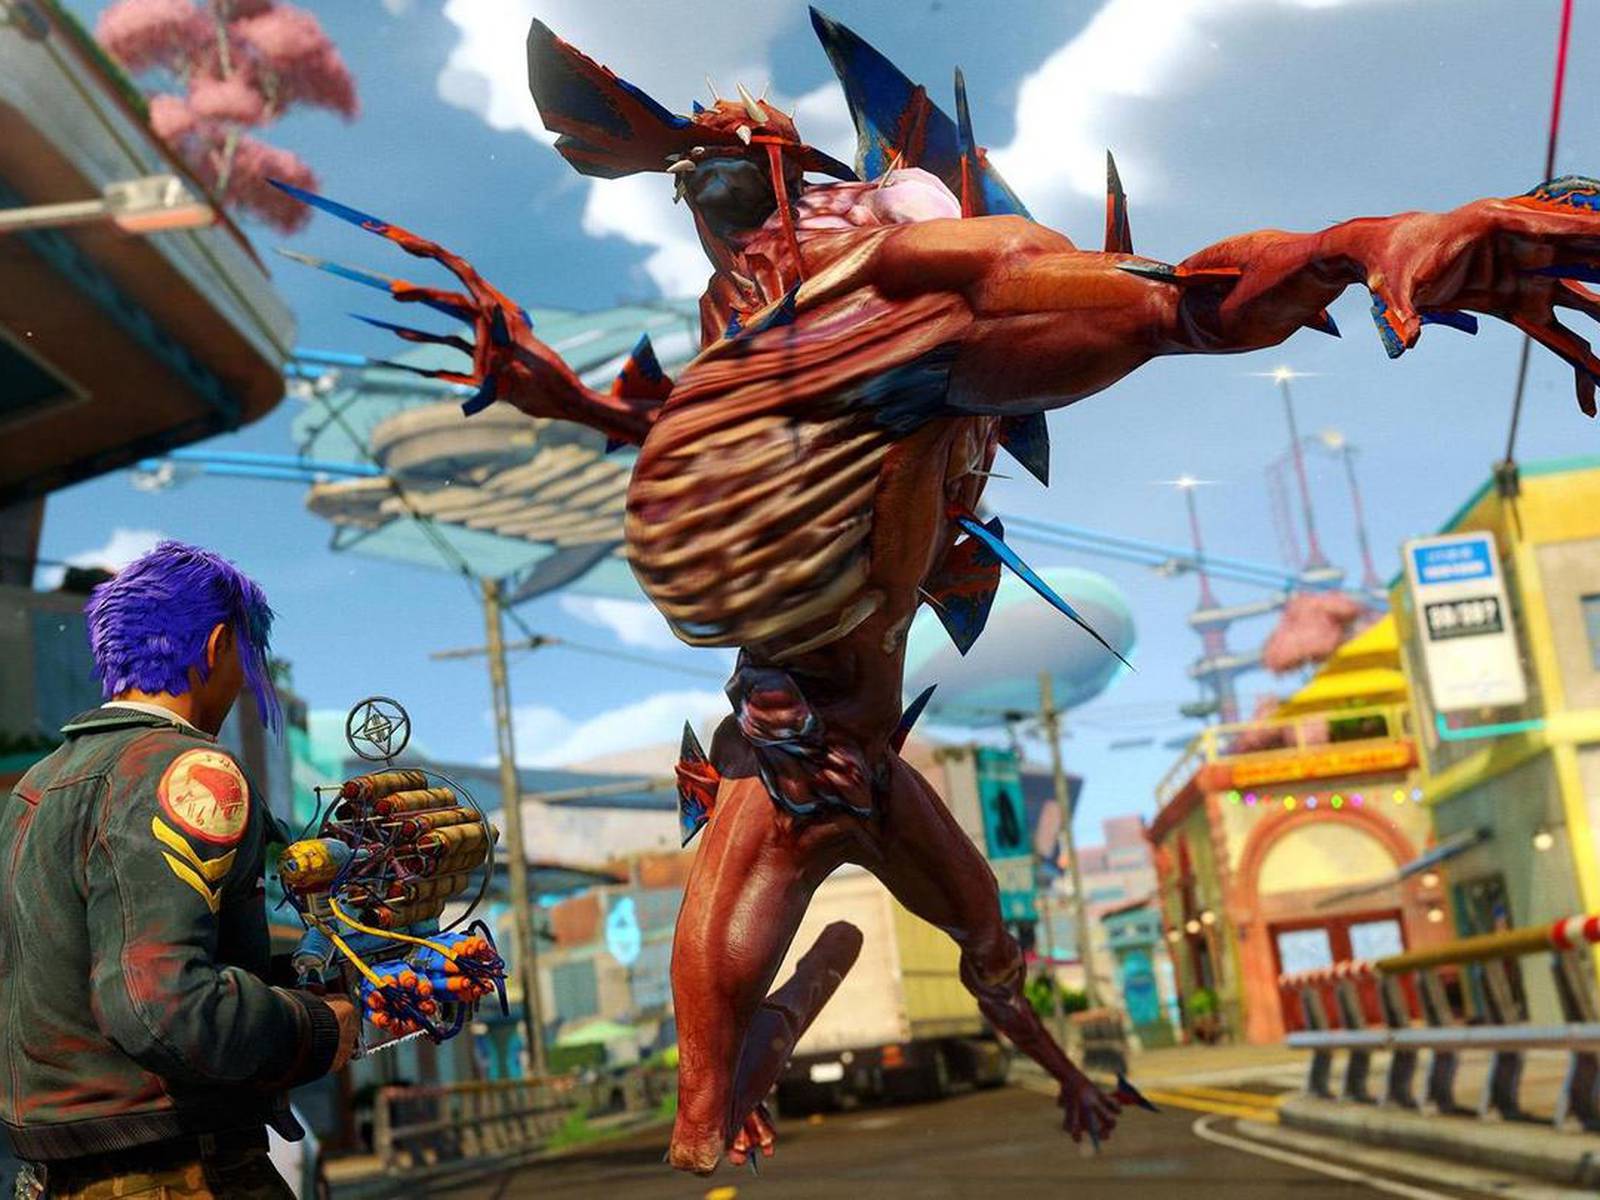 Sunset Overdrive Xbox One Game Review